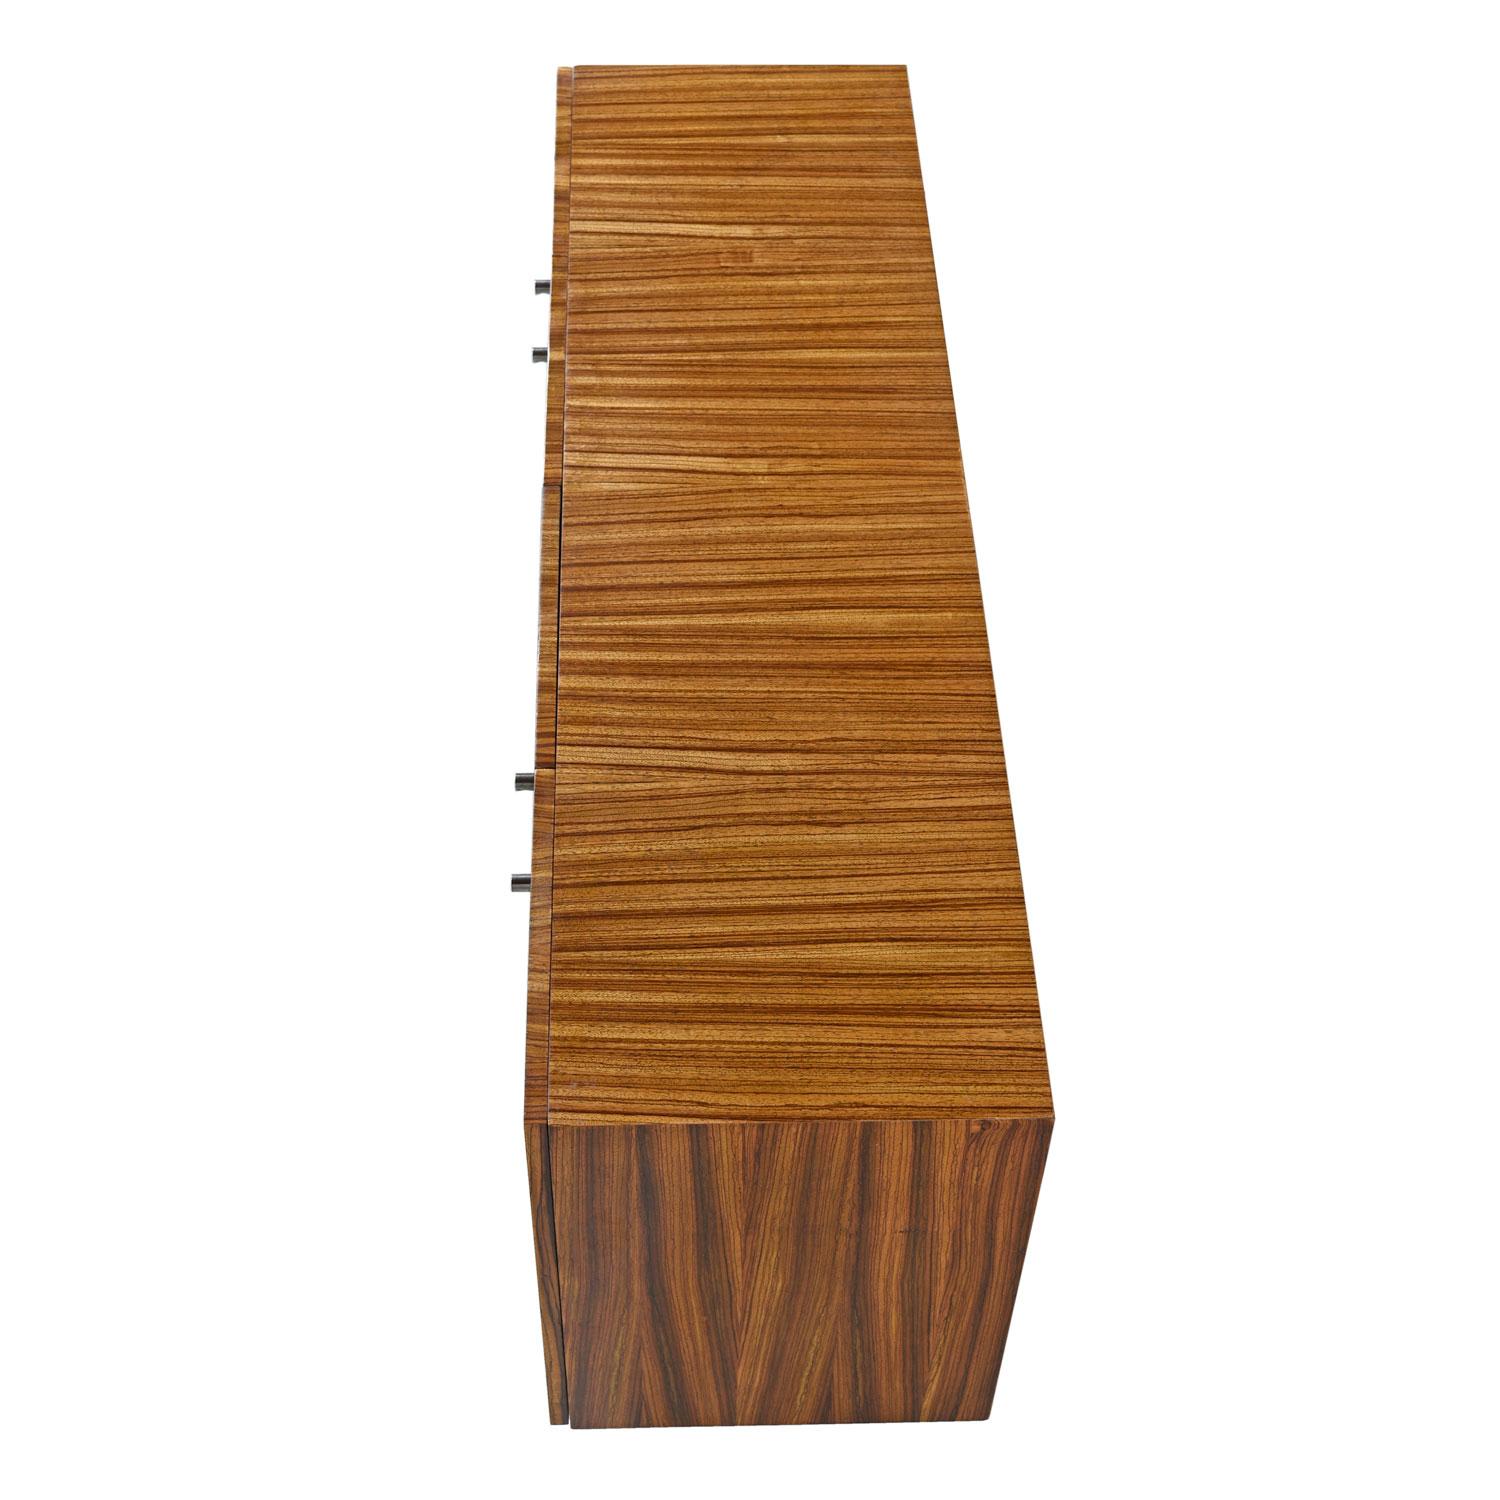 American Milo Baughman for Thayer Coggin Zebra Wood Credenza Cabinet with Wall-Mount